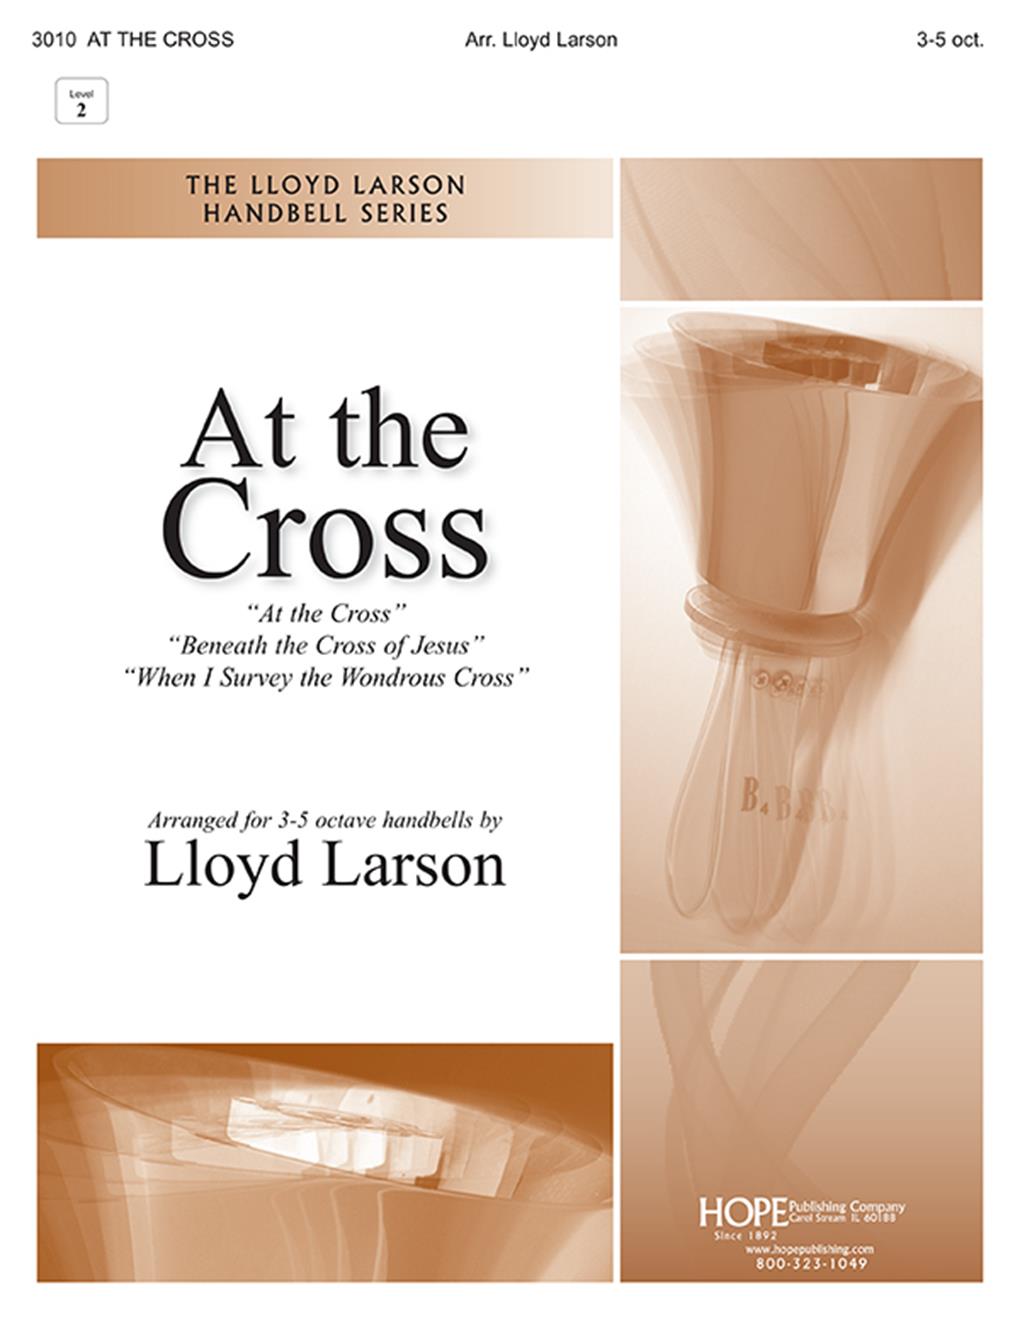 At the Cross - 3-5 Oct. Cover Image